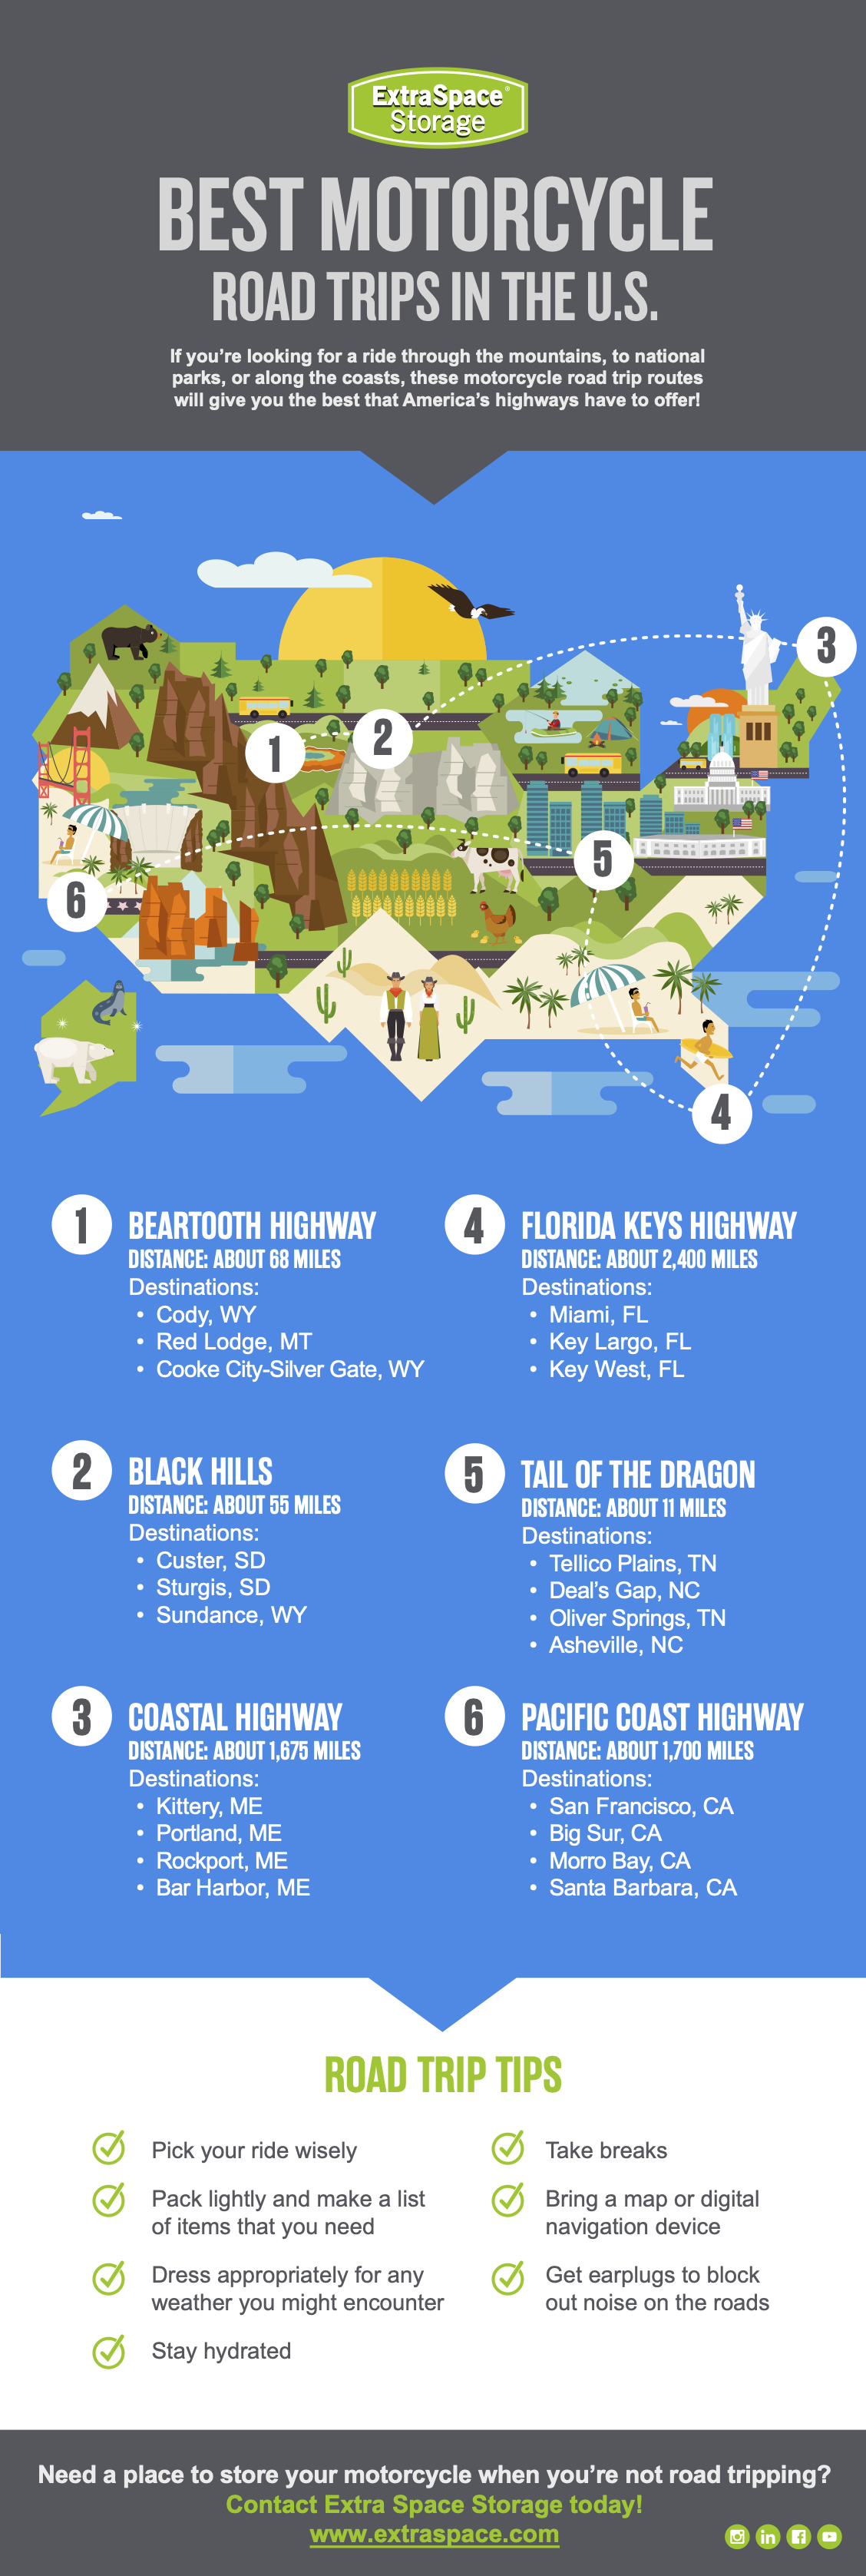 Infographic Describing the Best Motorcycle Roadtrip Locations Across the US